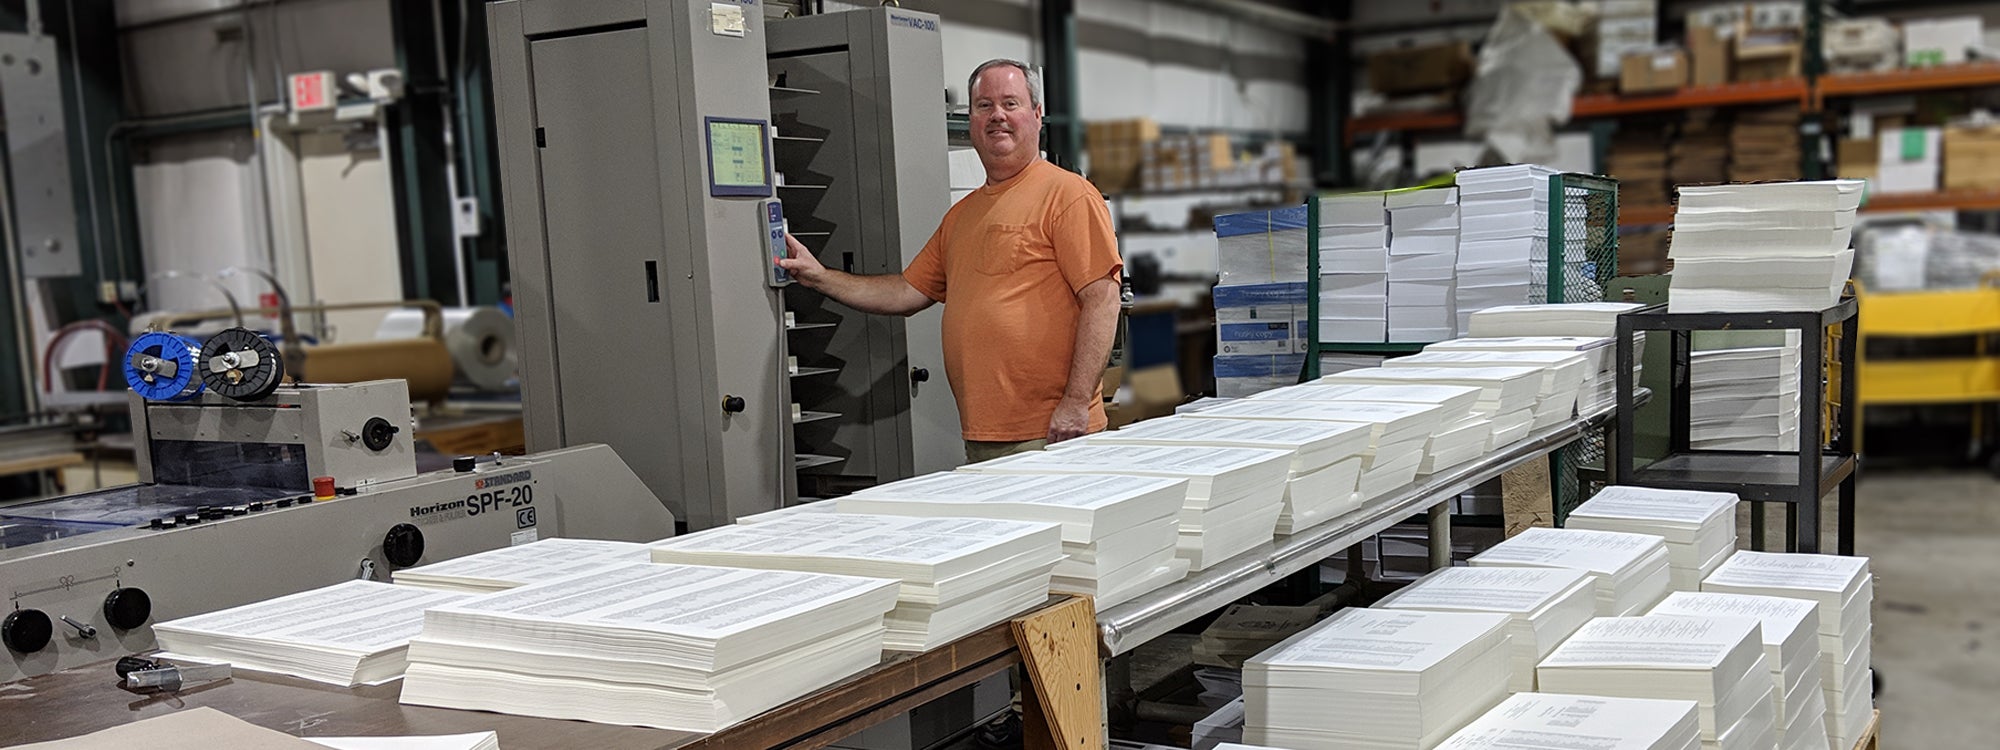 Bindery operations at University Printing and Graphics